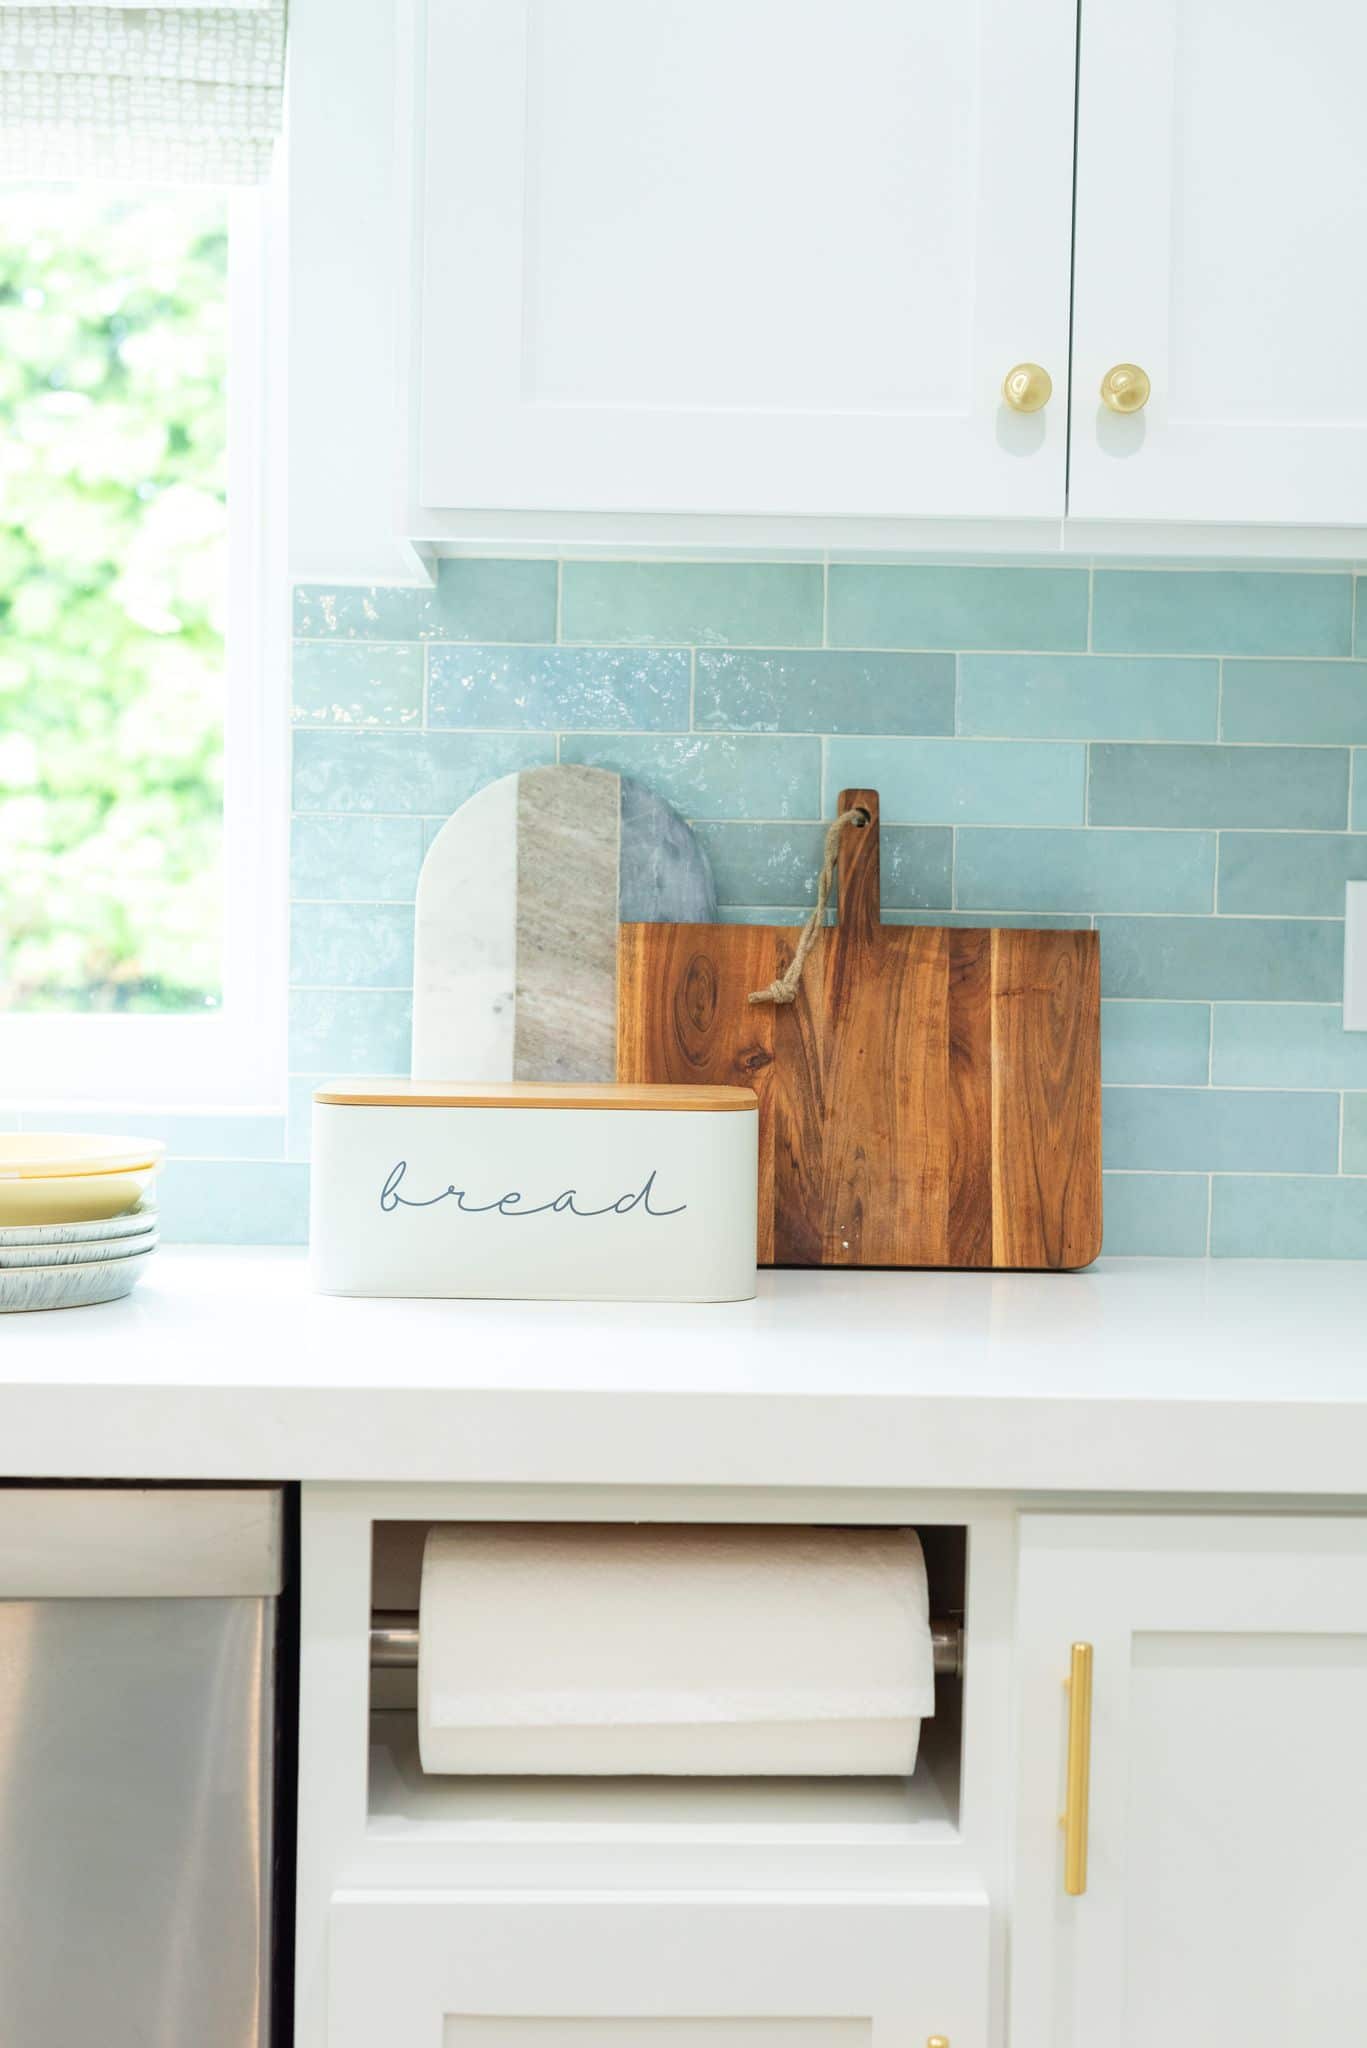 How To Hide Paper Towels In Kitchen - 5 Efficient Ways to